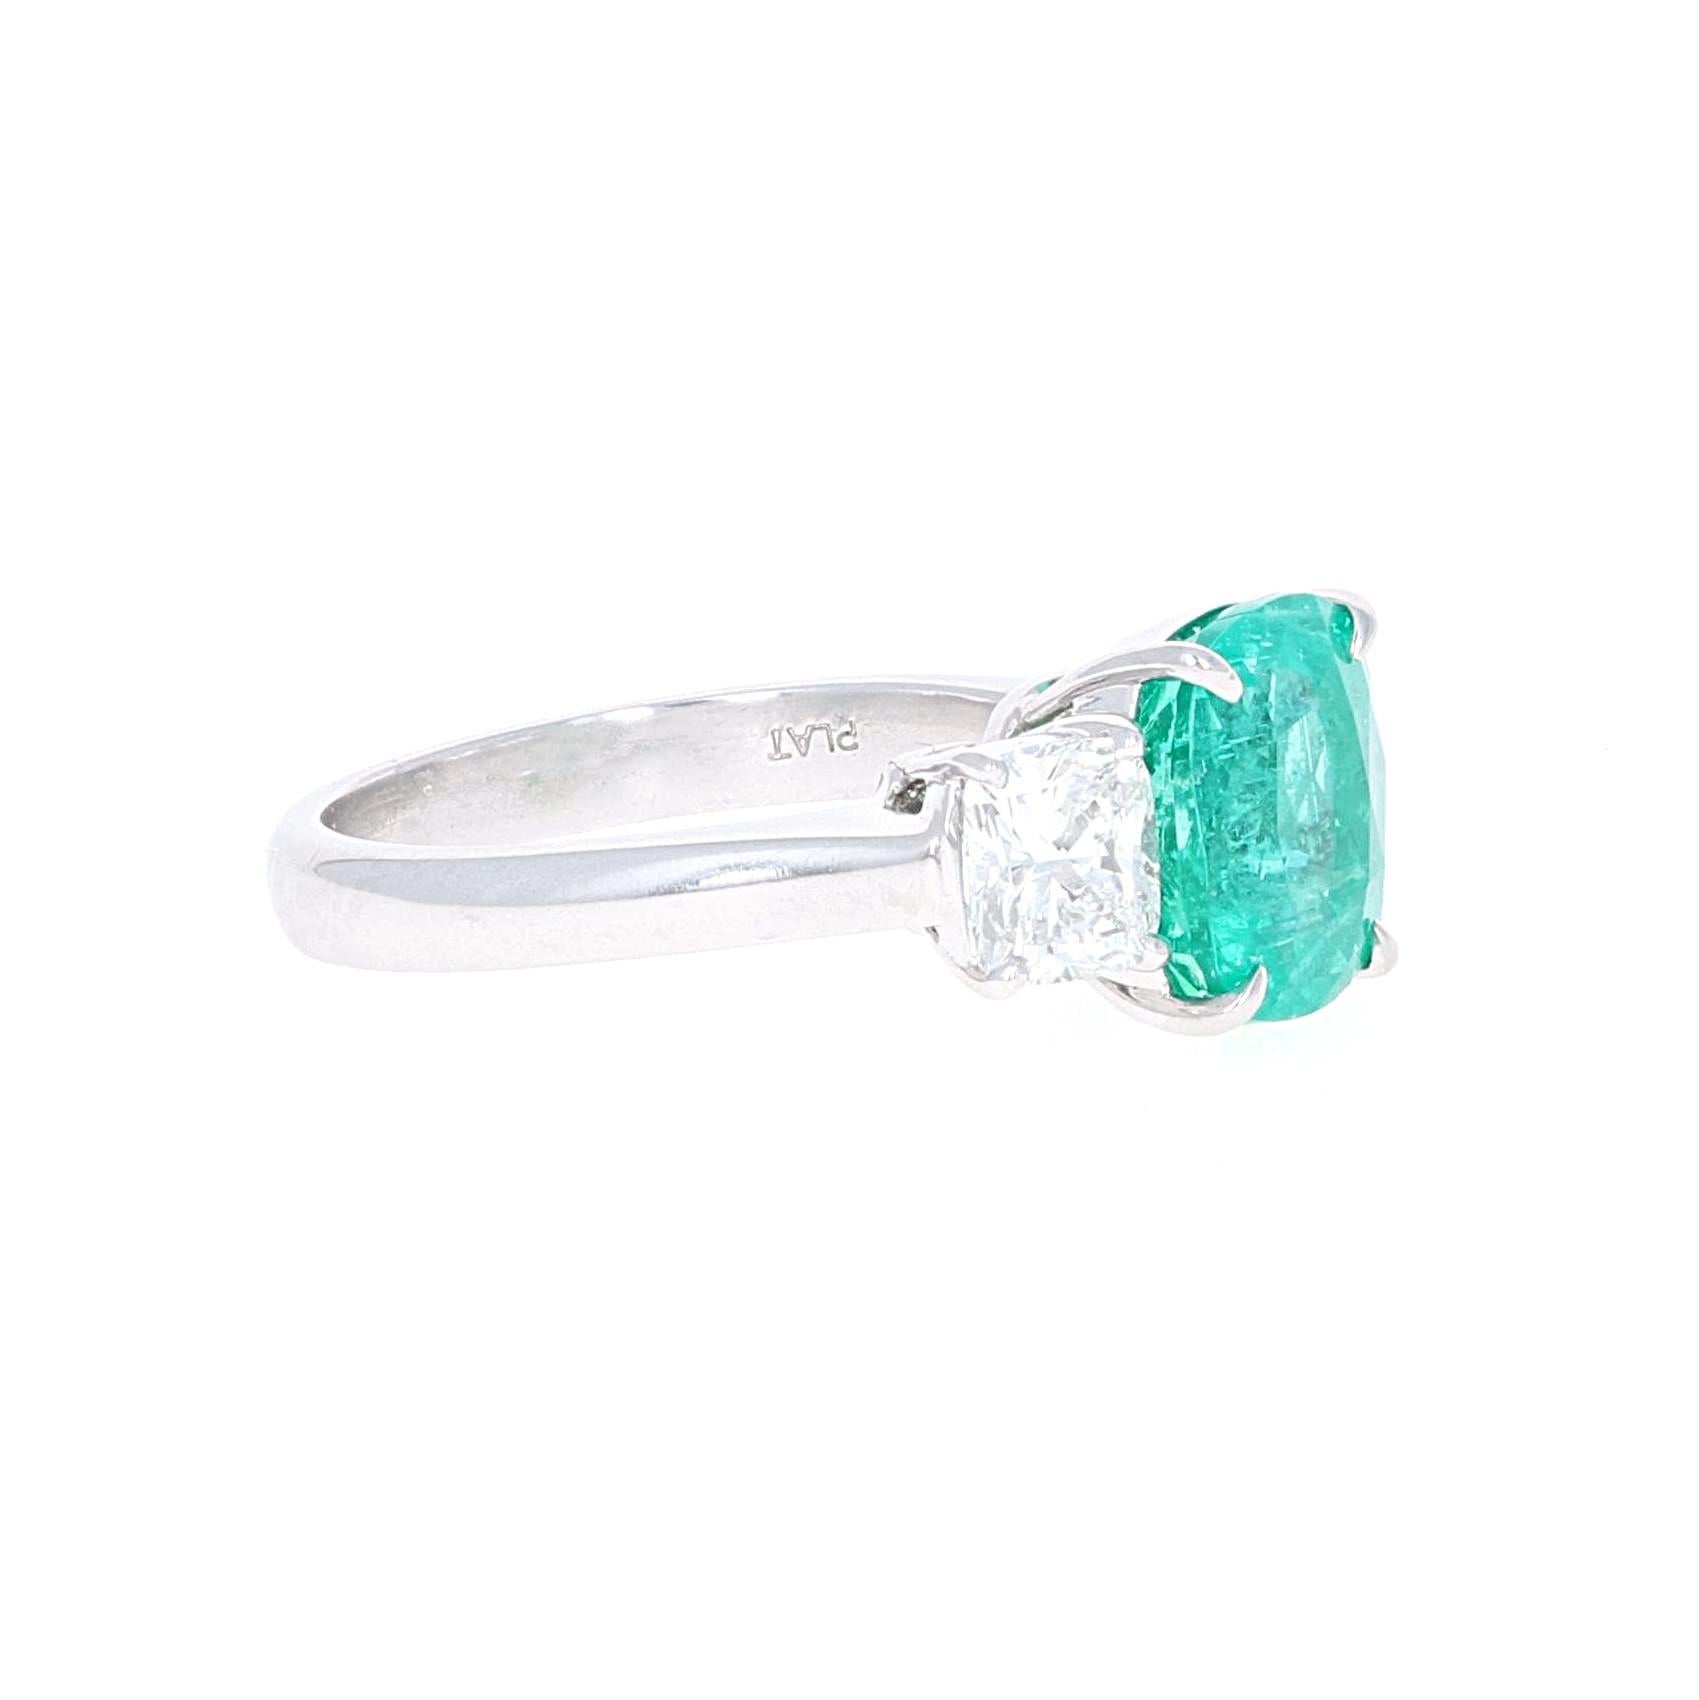 GIA certified, Platinum 3.10 carat cushion cut emerald and diamond ring three-stone cocktail ring. The emerals is a cushion modified brilliant cut. The color is classified as green and is natural beryl. The emerald is Columbian Minor. The treatment